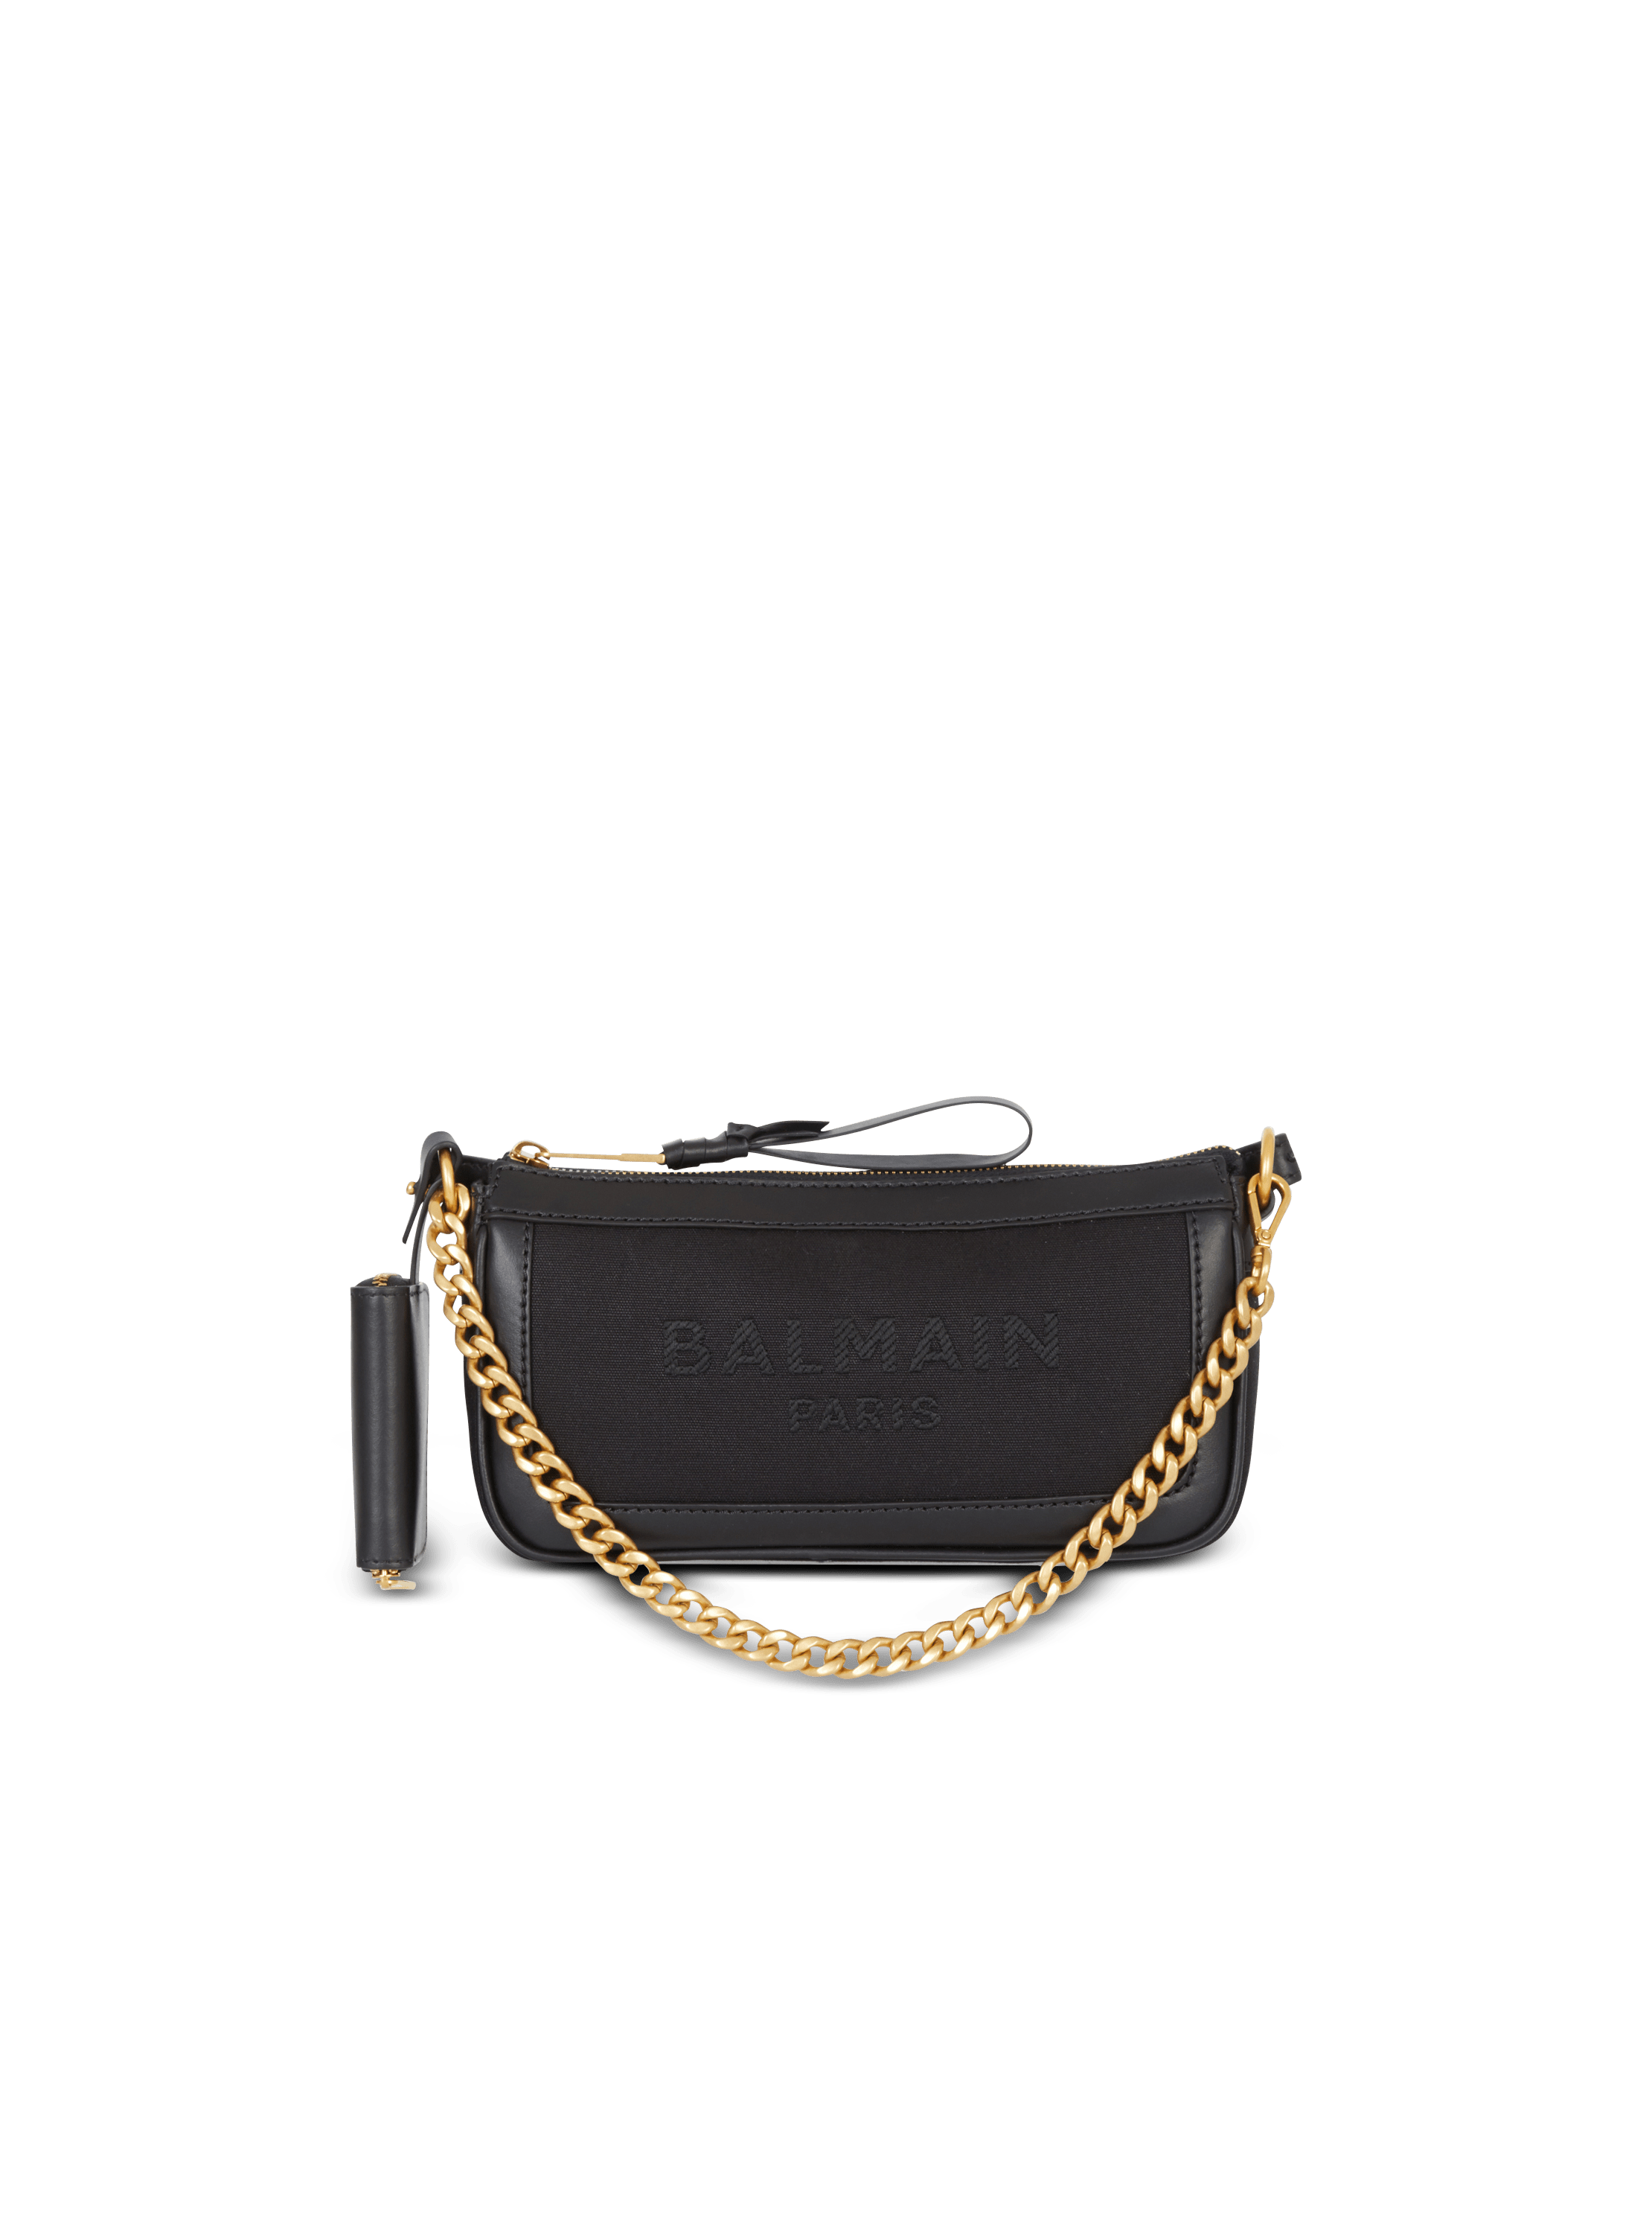 B-Army Pouch canvas and leather bag